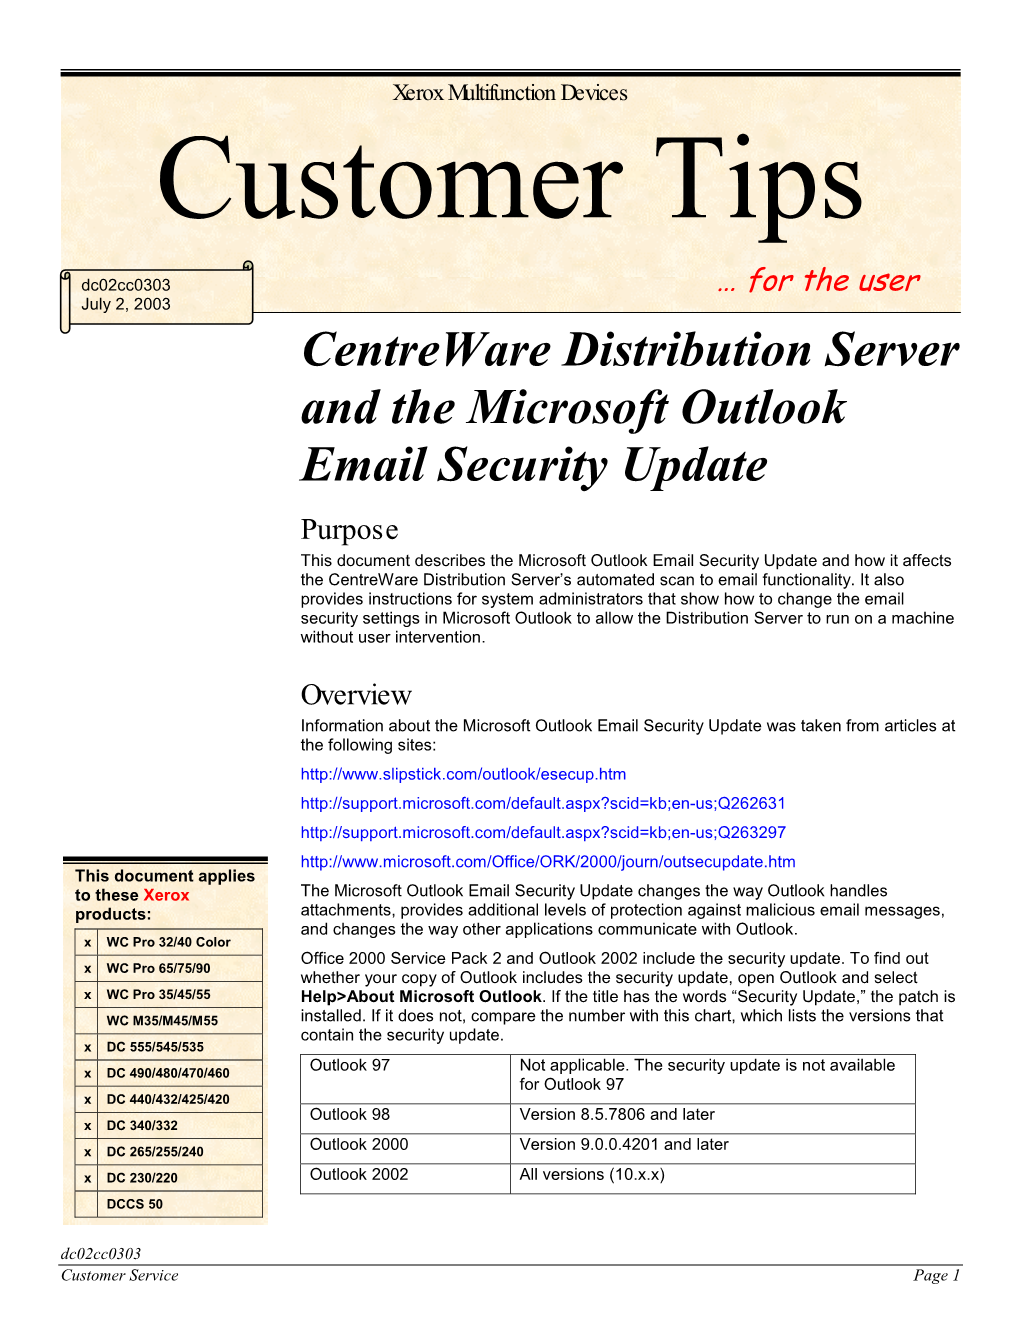 Centreware Distribution Server and the Microsoft Outlook Email Security